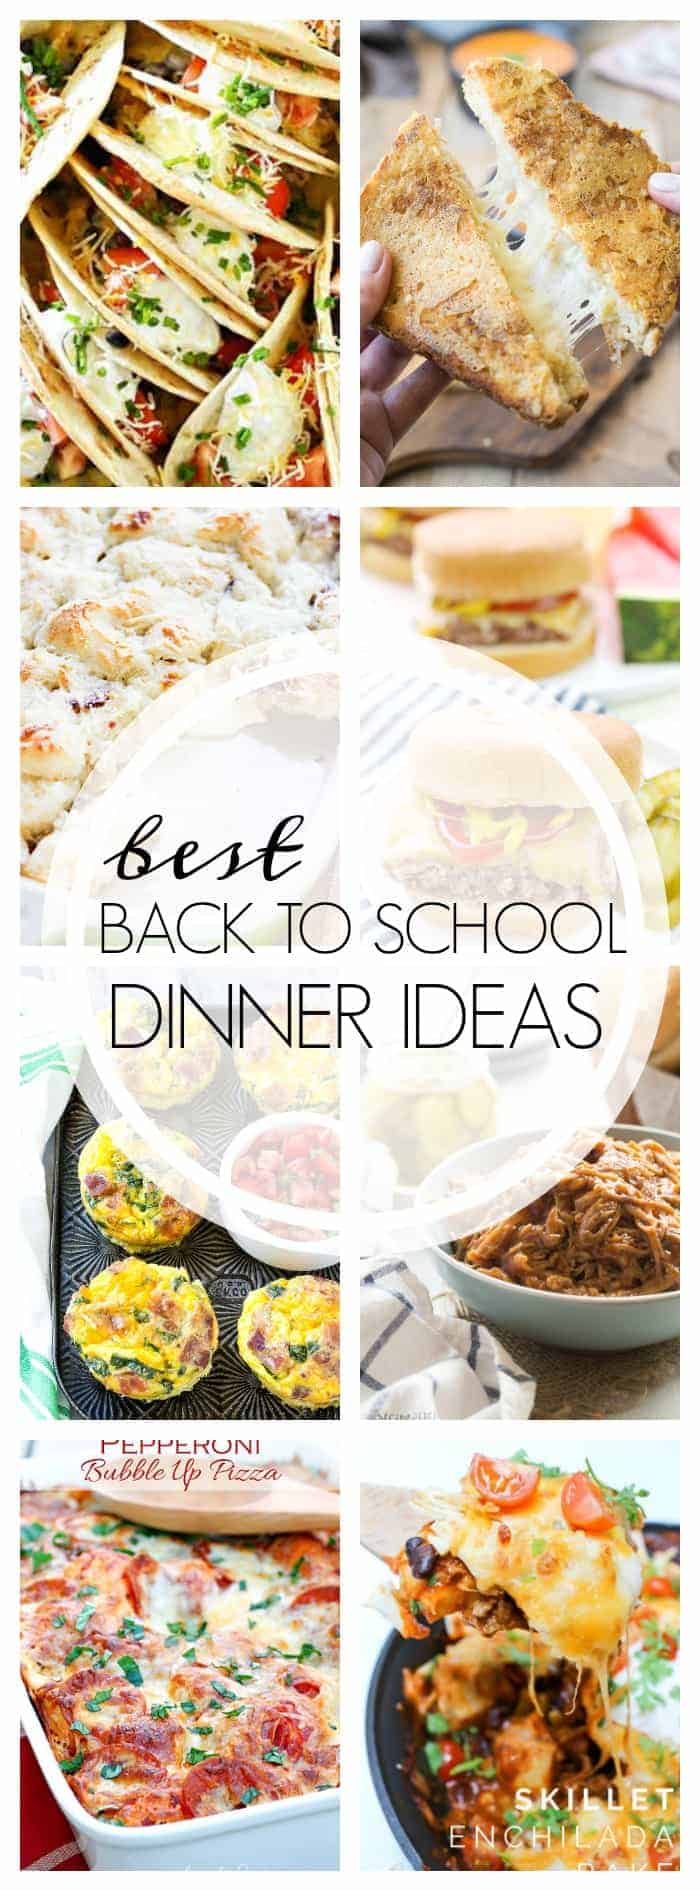 Easy Dinner Recipes for Back to School! - The Recipe Rebel